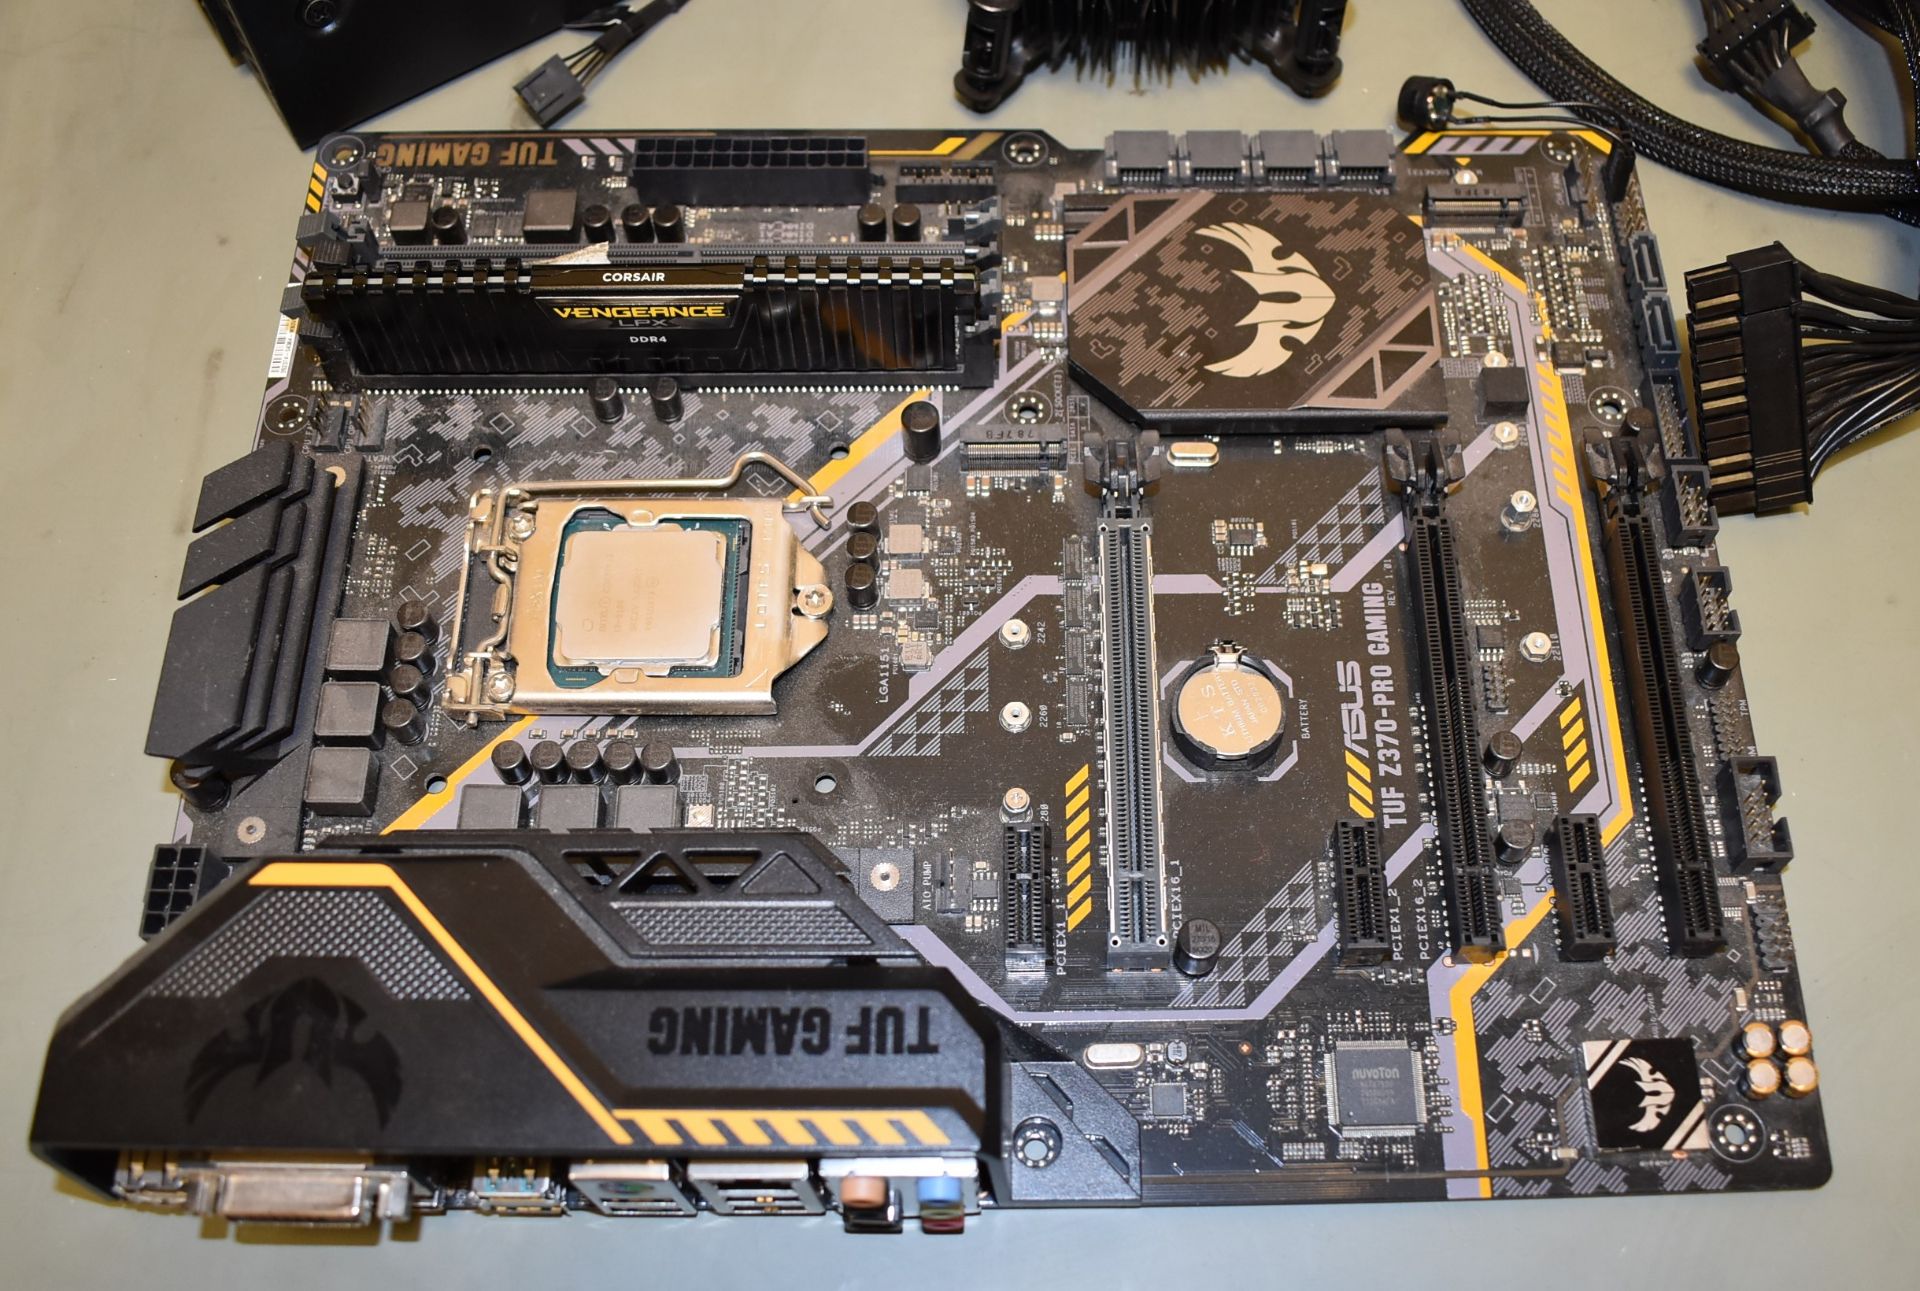 1 x Test Bench PC System Featuring an Asus TUF Z370 Gaming Intel Motherboard, Intel i3-9100 - Image 4 of 6